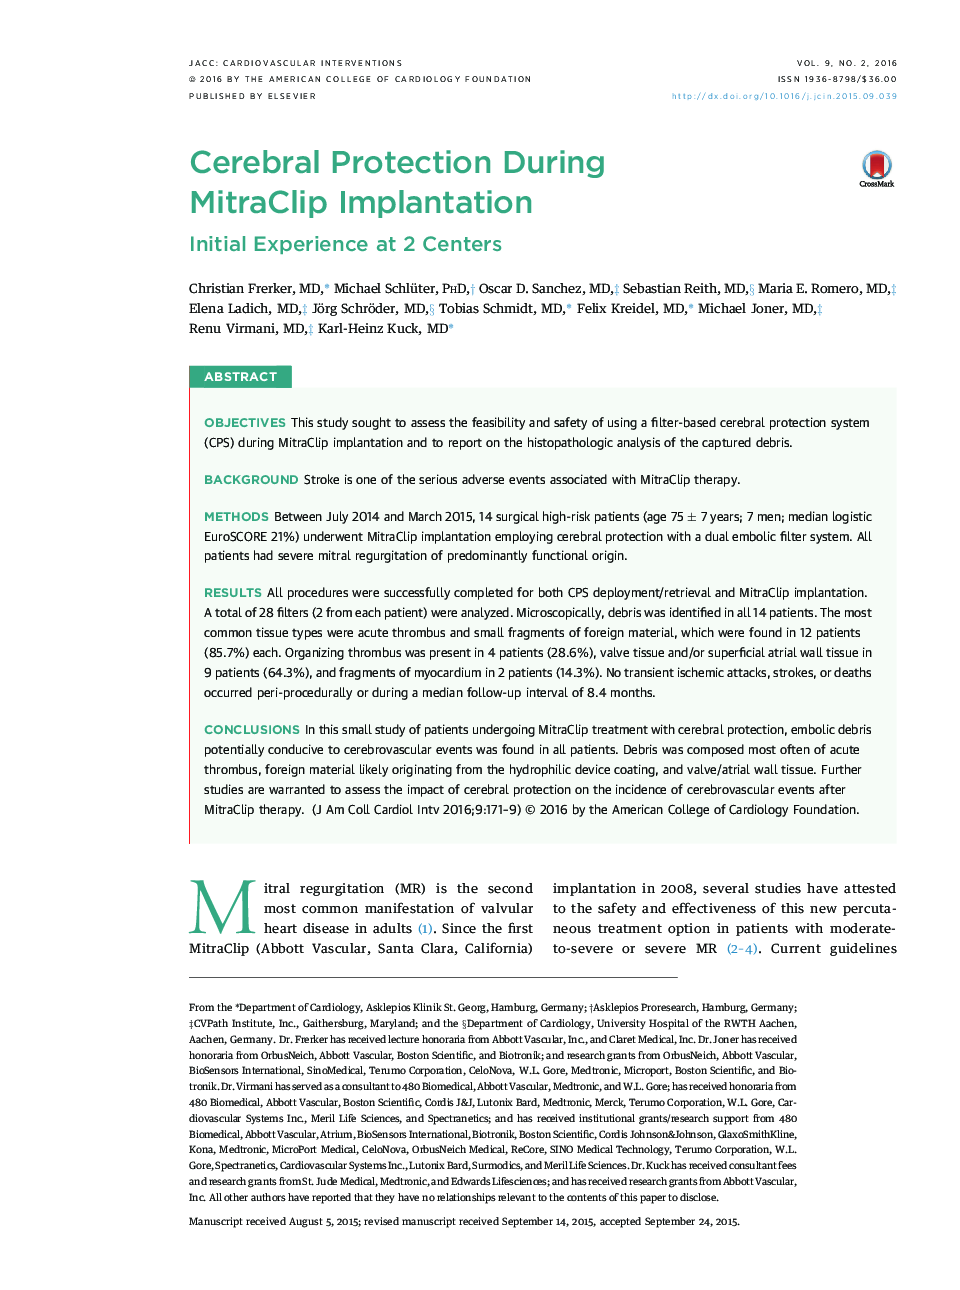 Cerebral Protection During MitraClip Implantation : Initial Experience at 2 Centers